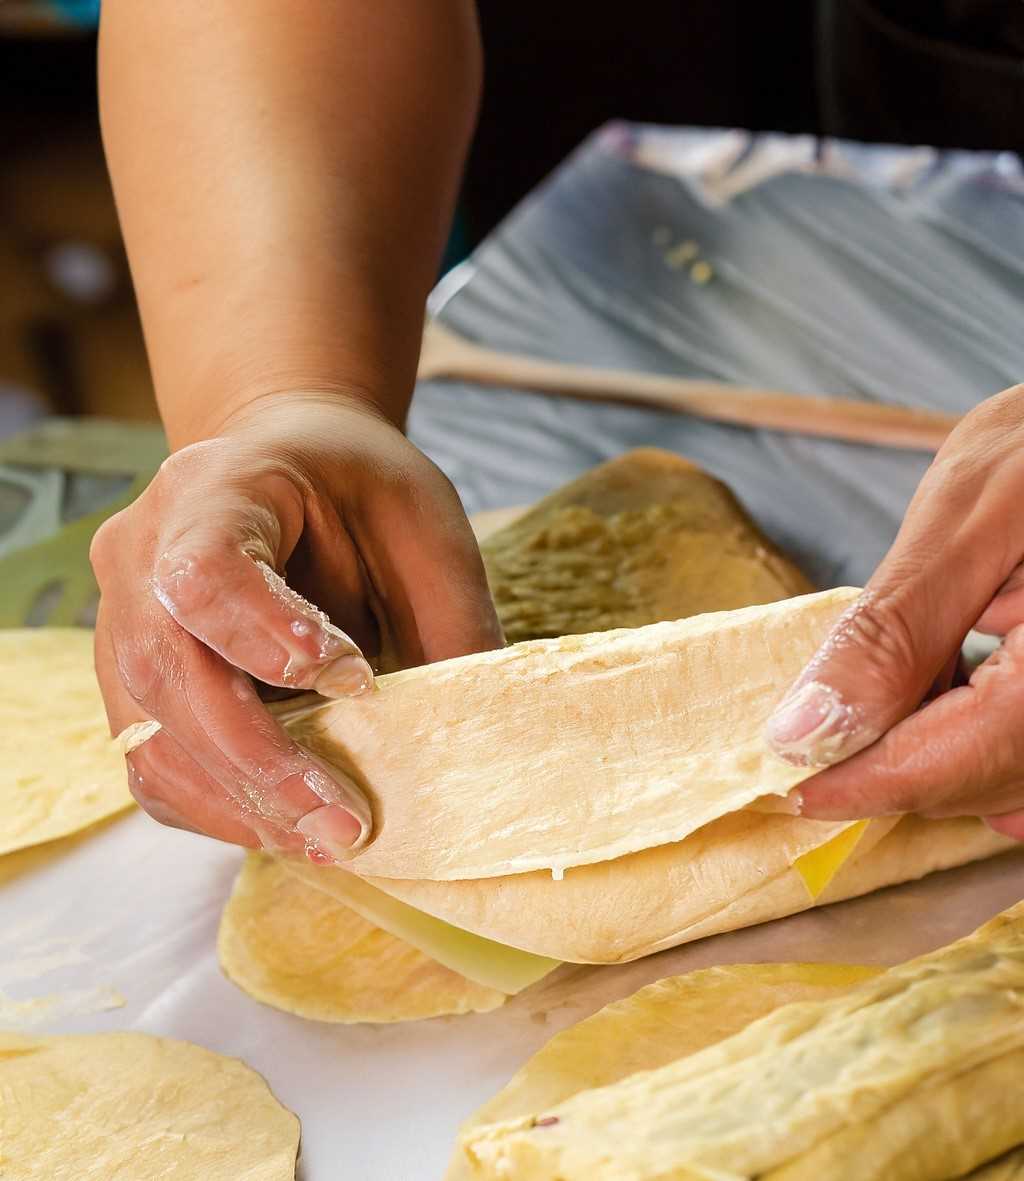 A hands-on approach to tamale-making, filling, and wrapping each tamale.